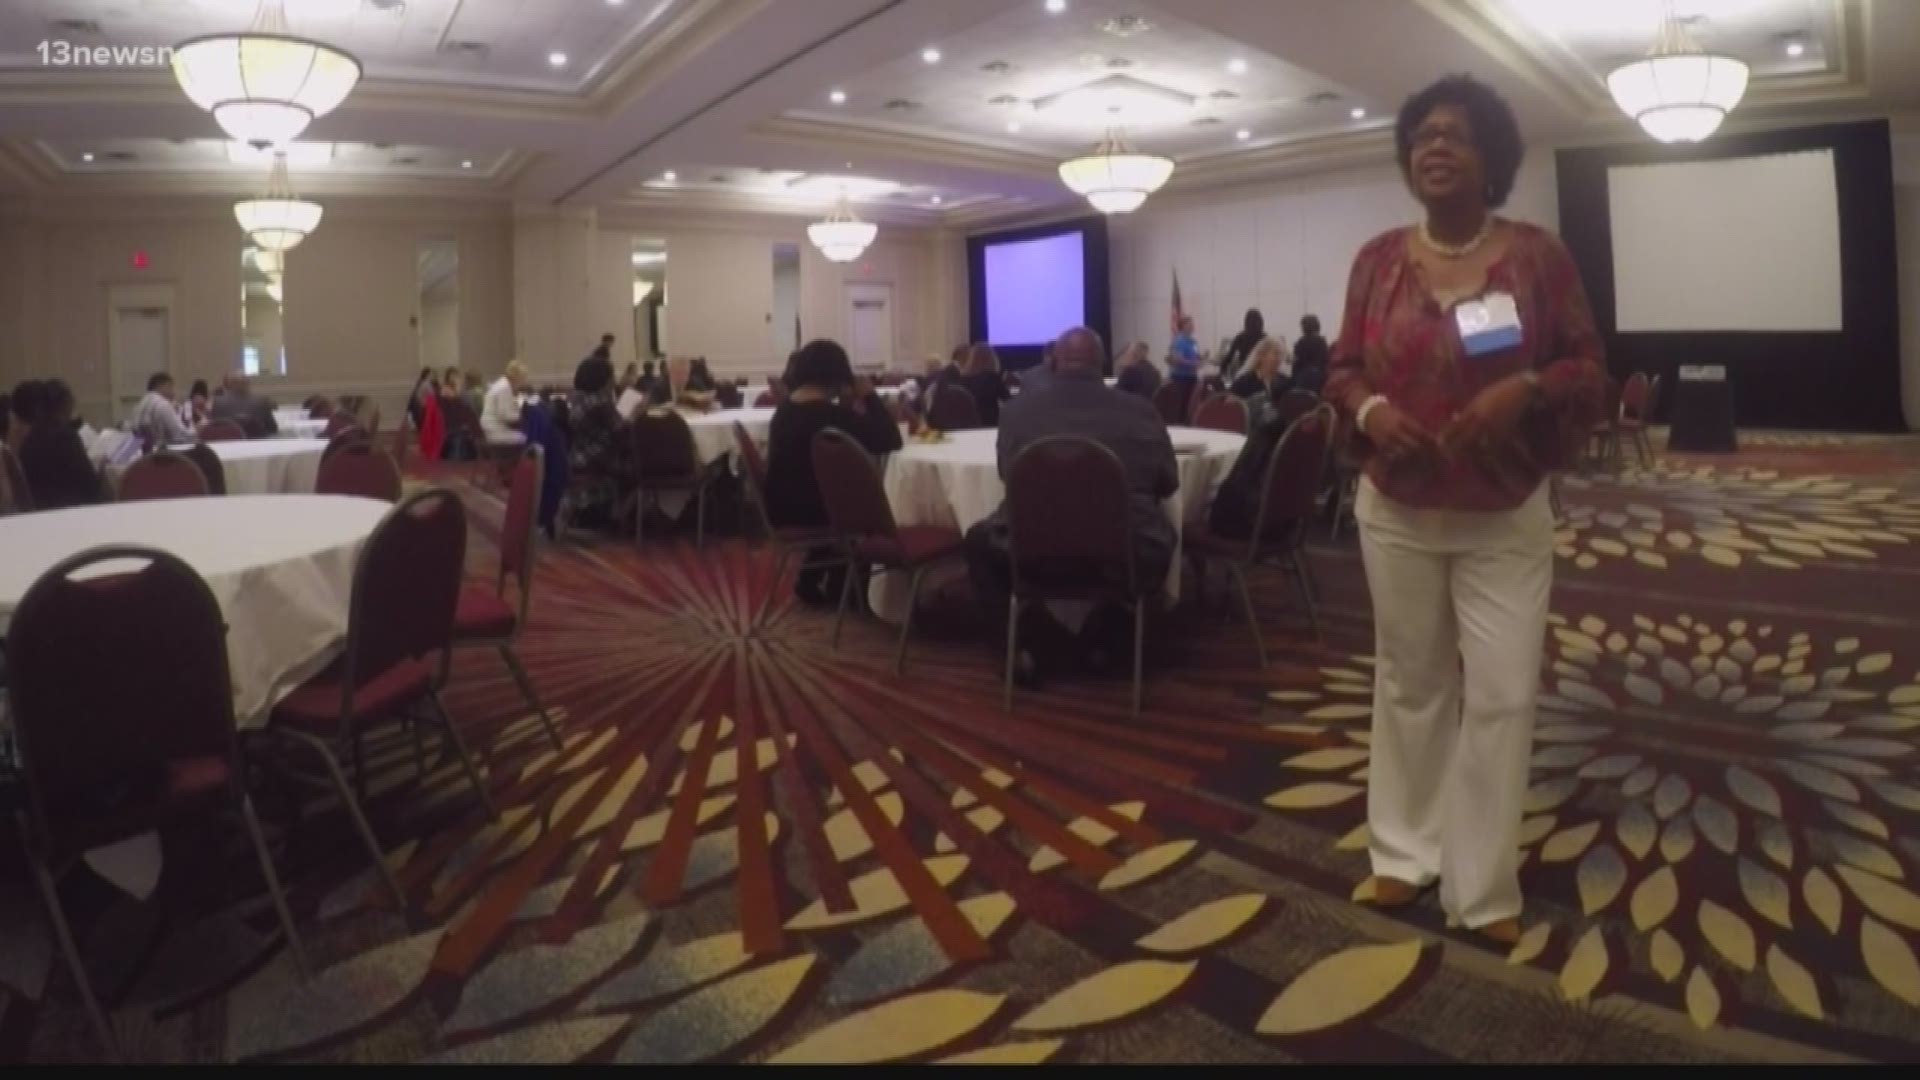 Leaders in the area gathered in Norfolk for a conference to bring the community together.